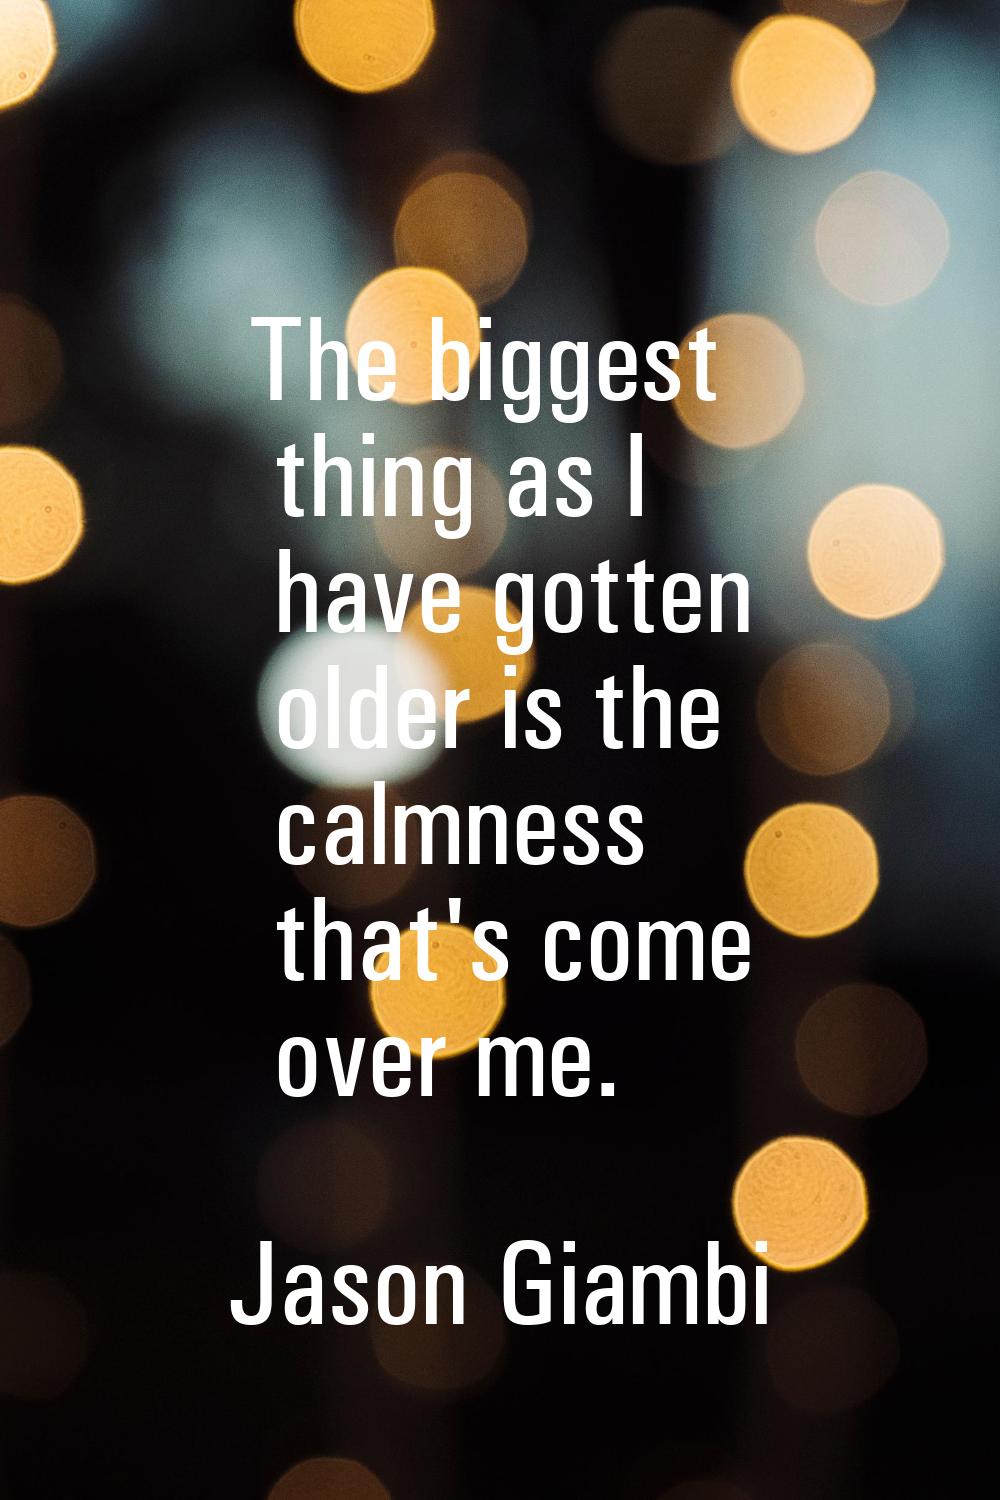 The biggest thing as I have gotten older is the calmness that's come over me.